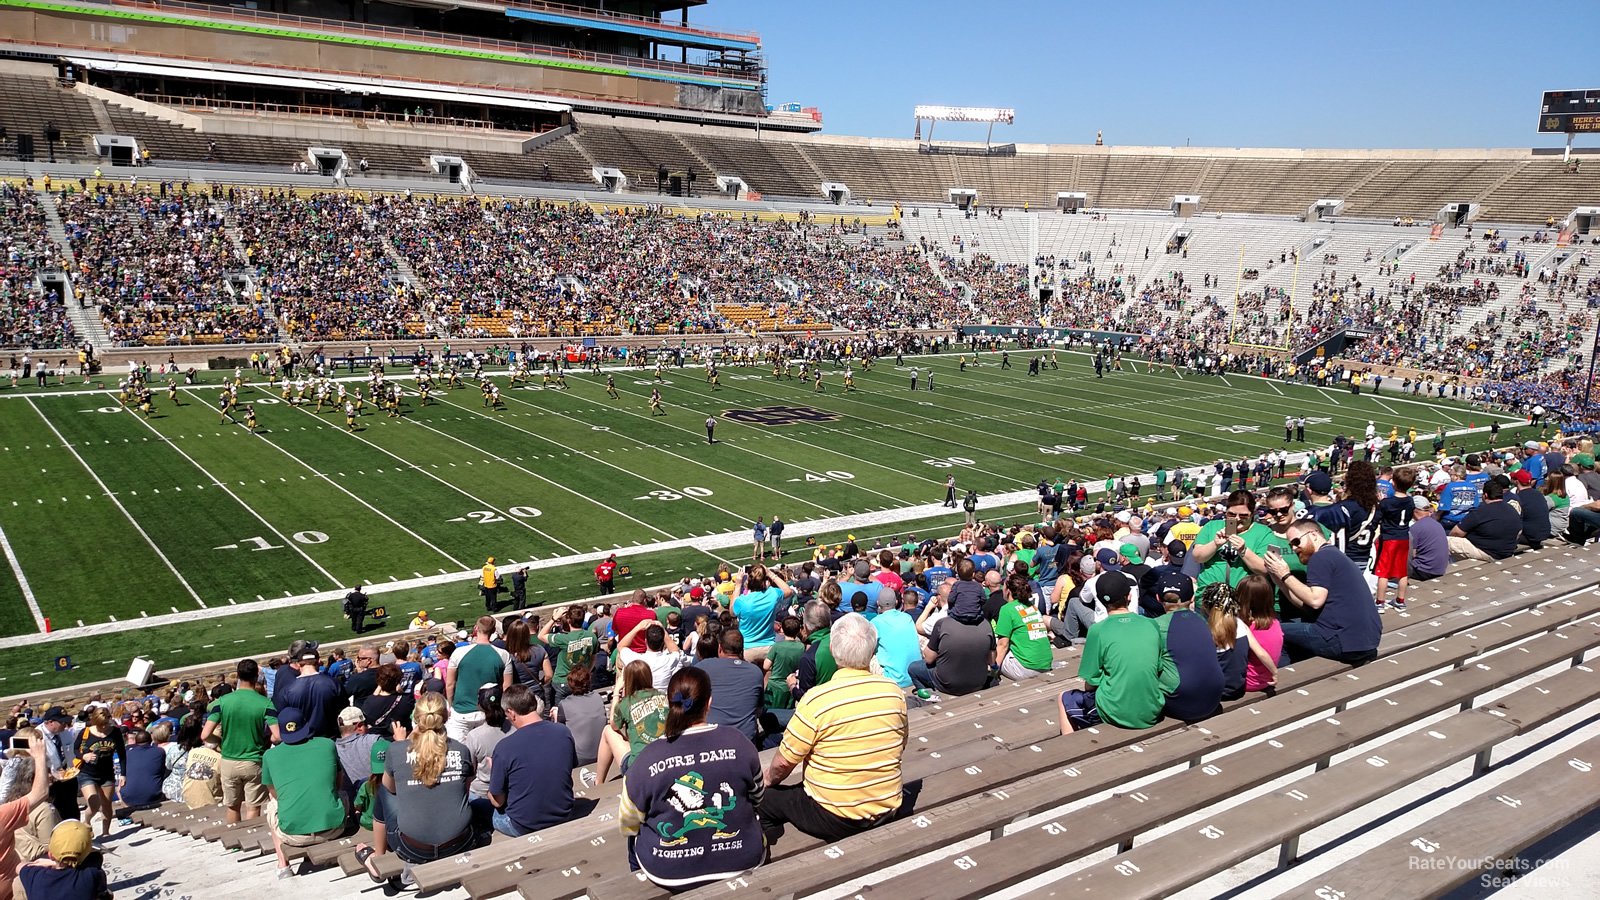 section 13, row 56 seat view  - notre dame stadium